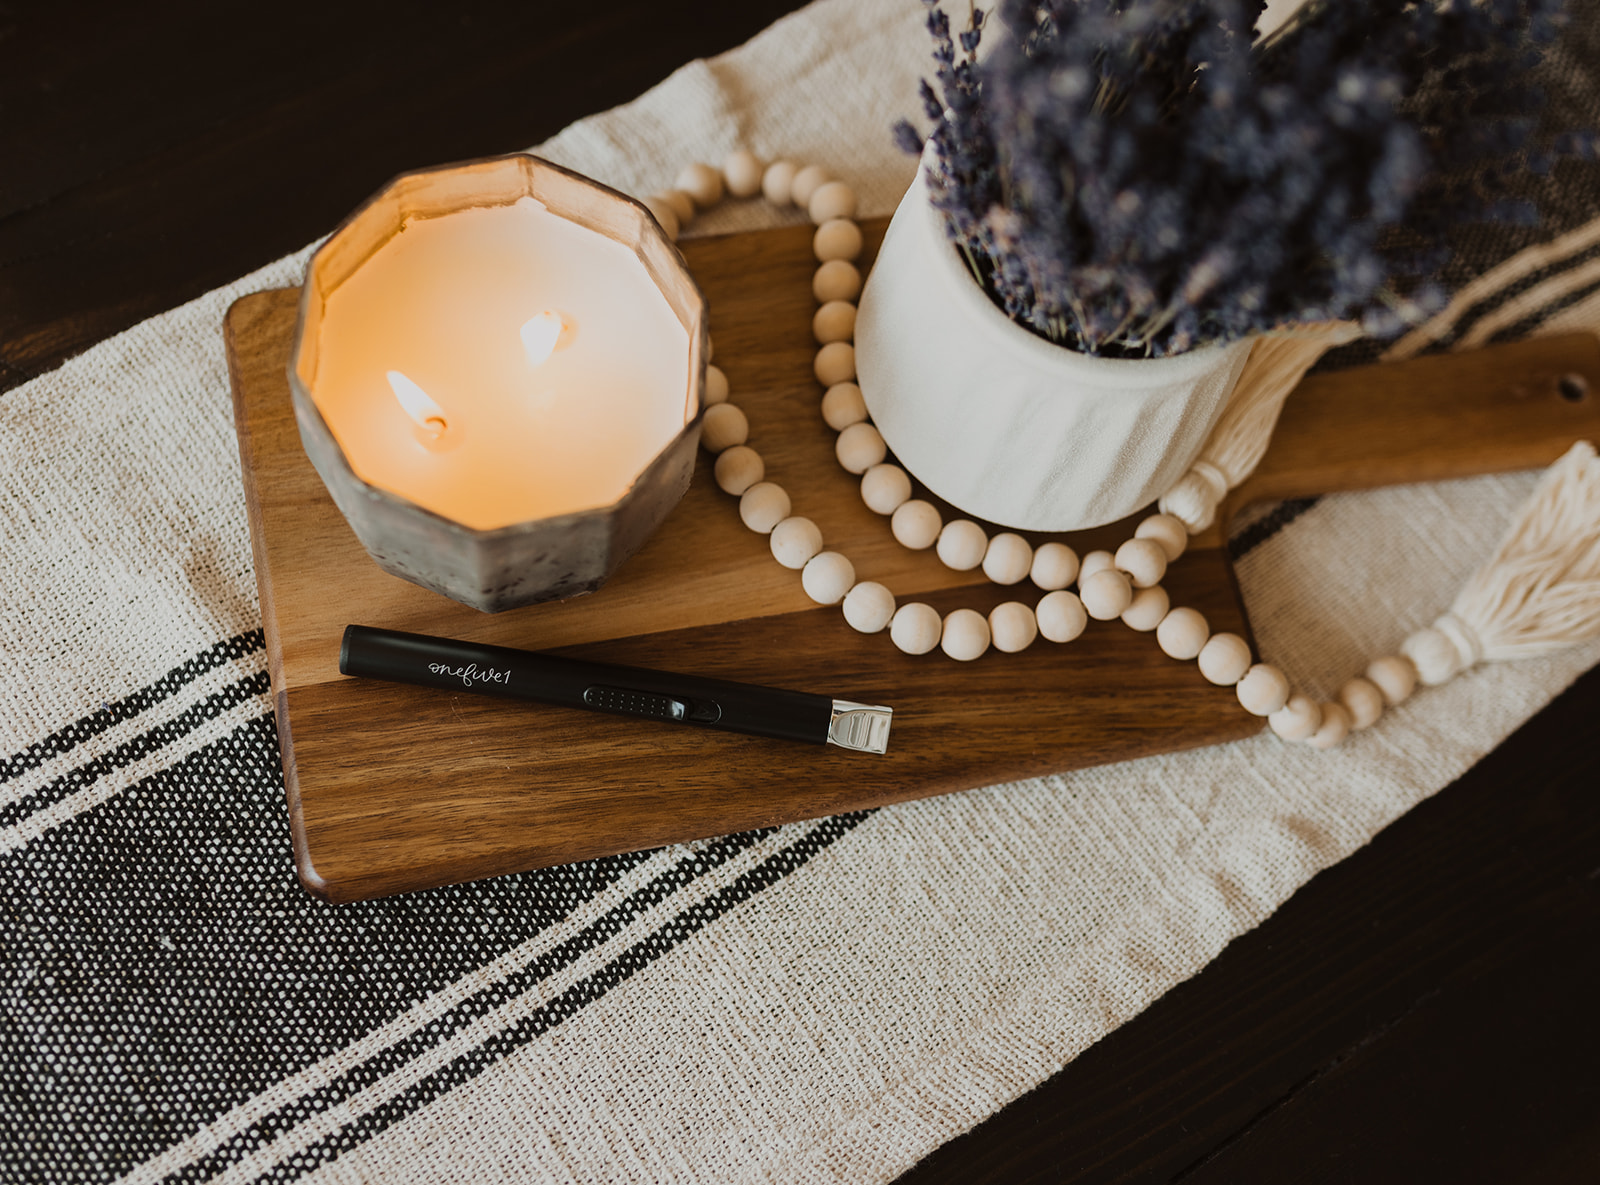 candle, prayer beads and plant pot on wooden board on top of stripe table runner